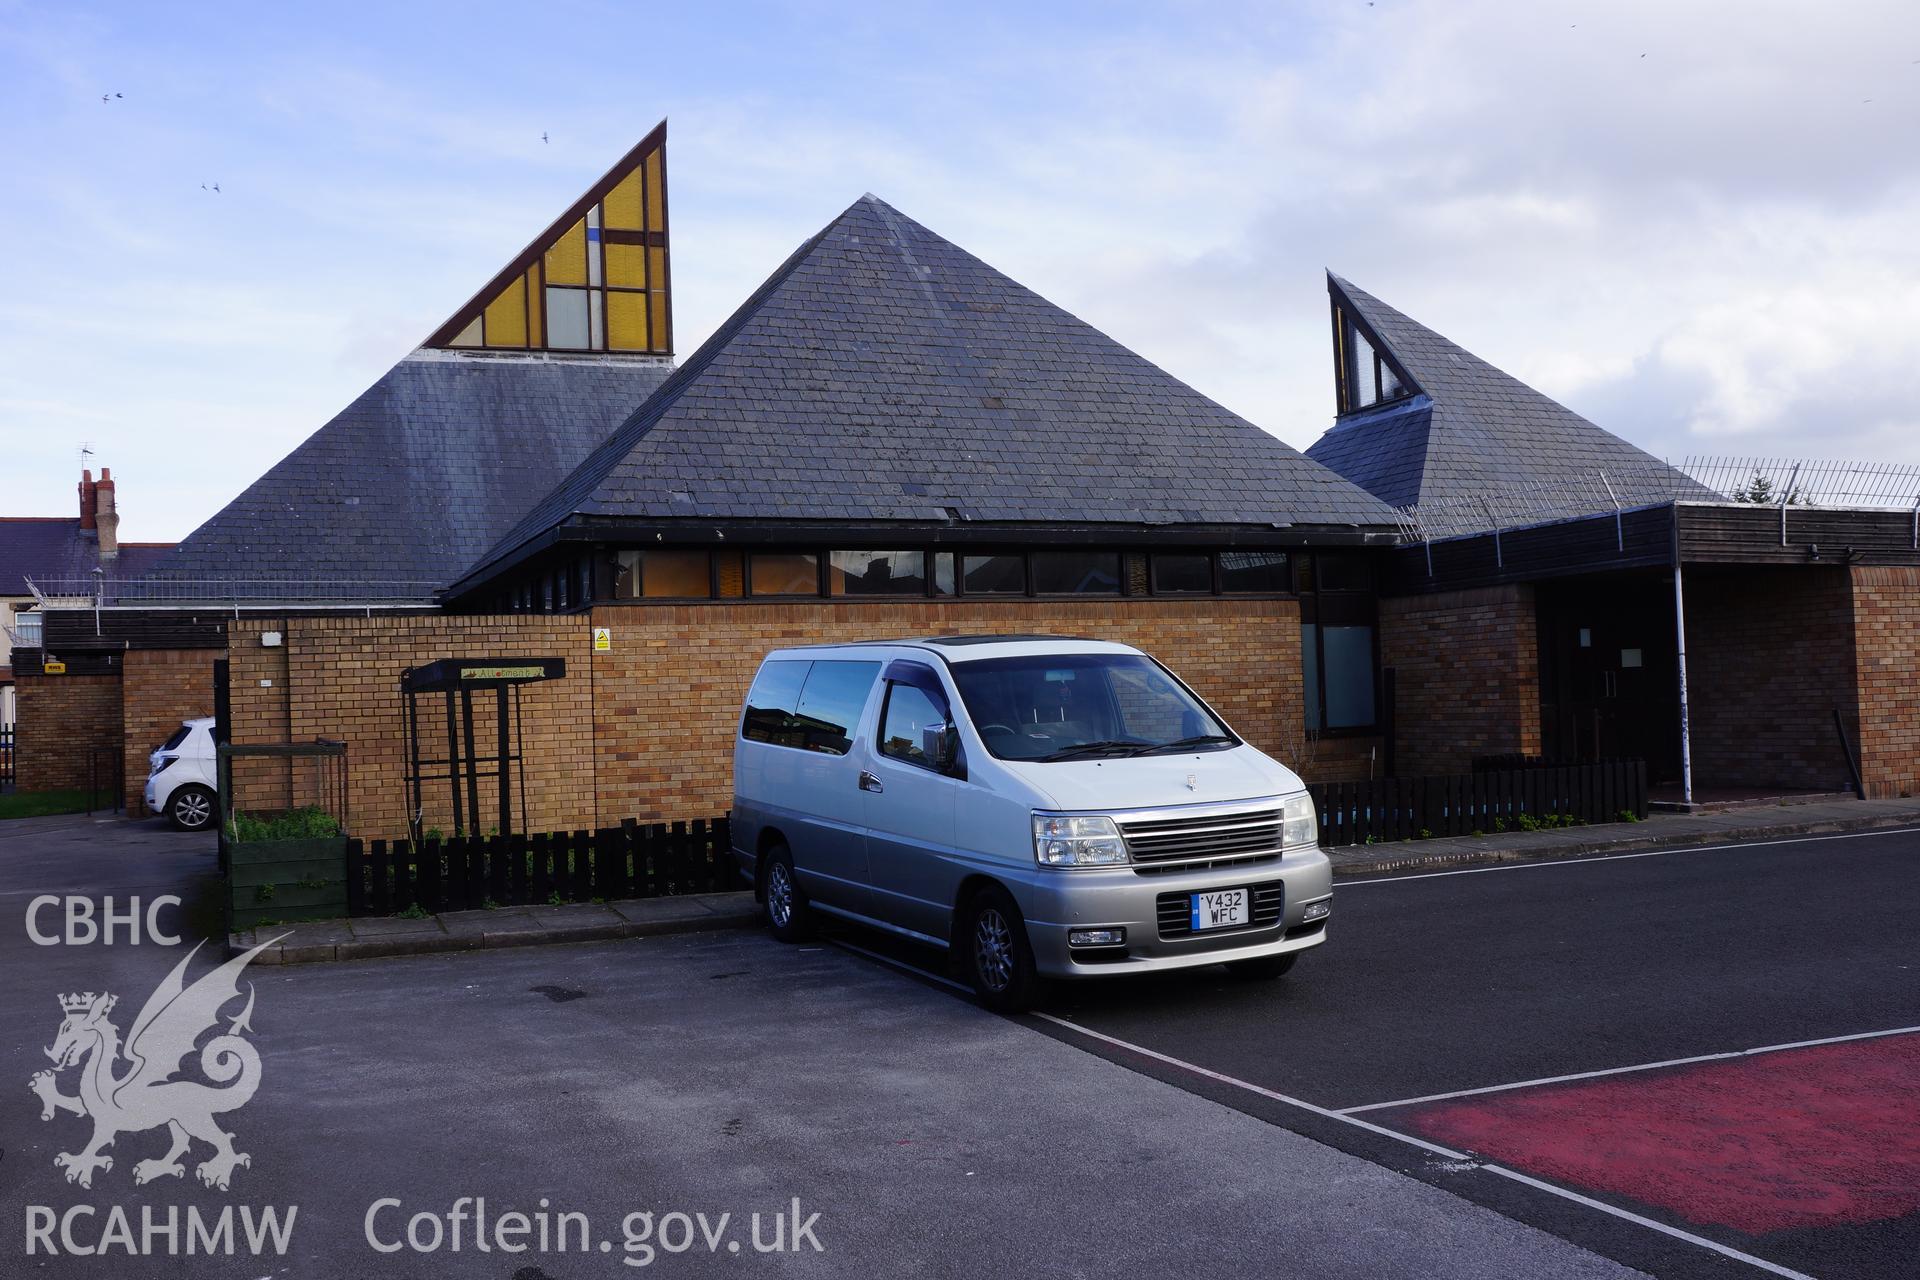 Digital colour photograph showing exterior of Our Lady of the Assumption Catholic church, Rhyl.